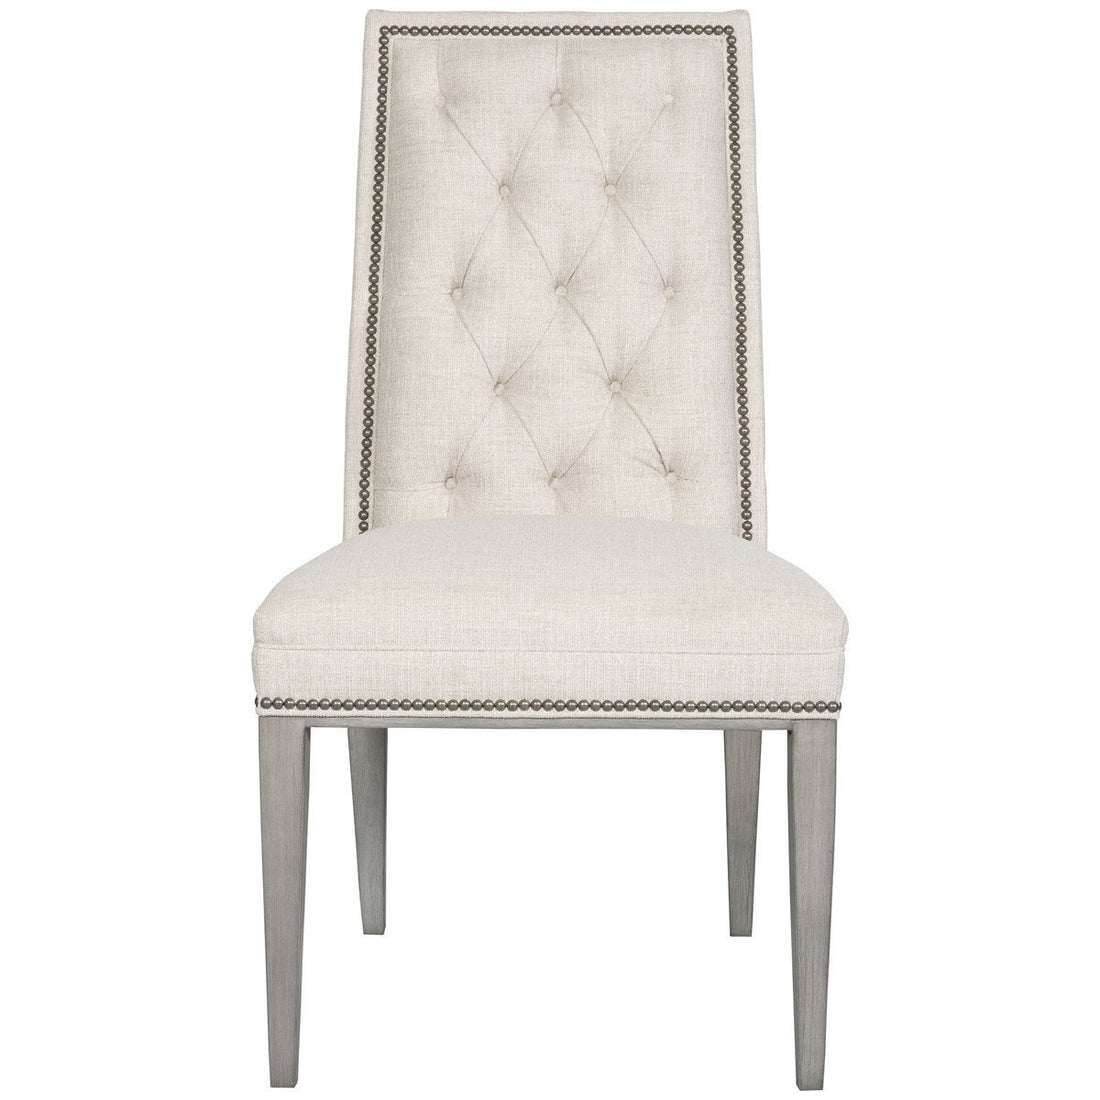 Vanguard Furniture Hanover Stocked Performance Dining Side Chair